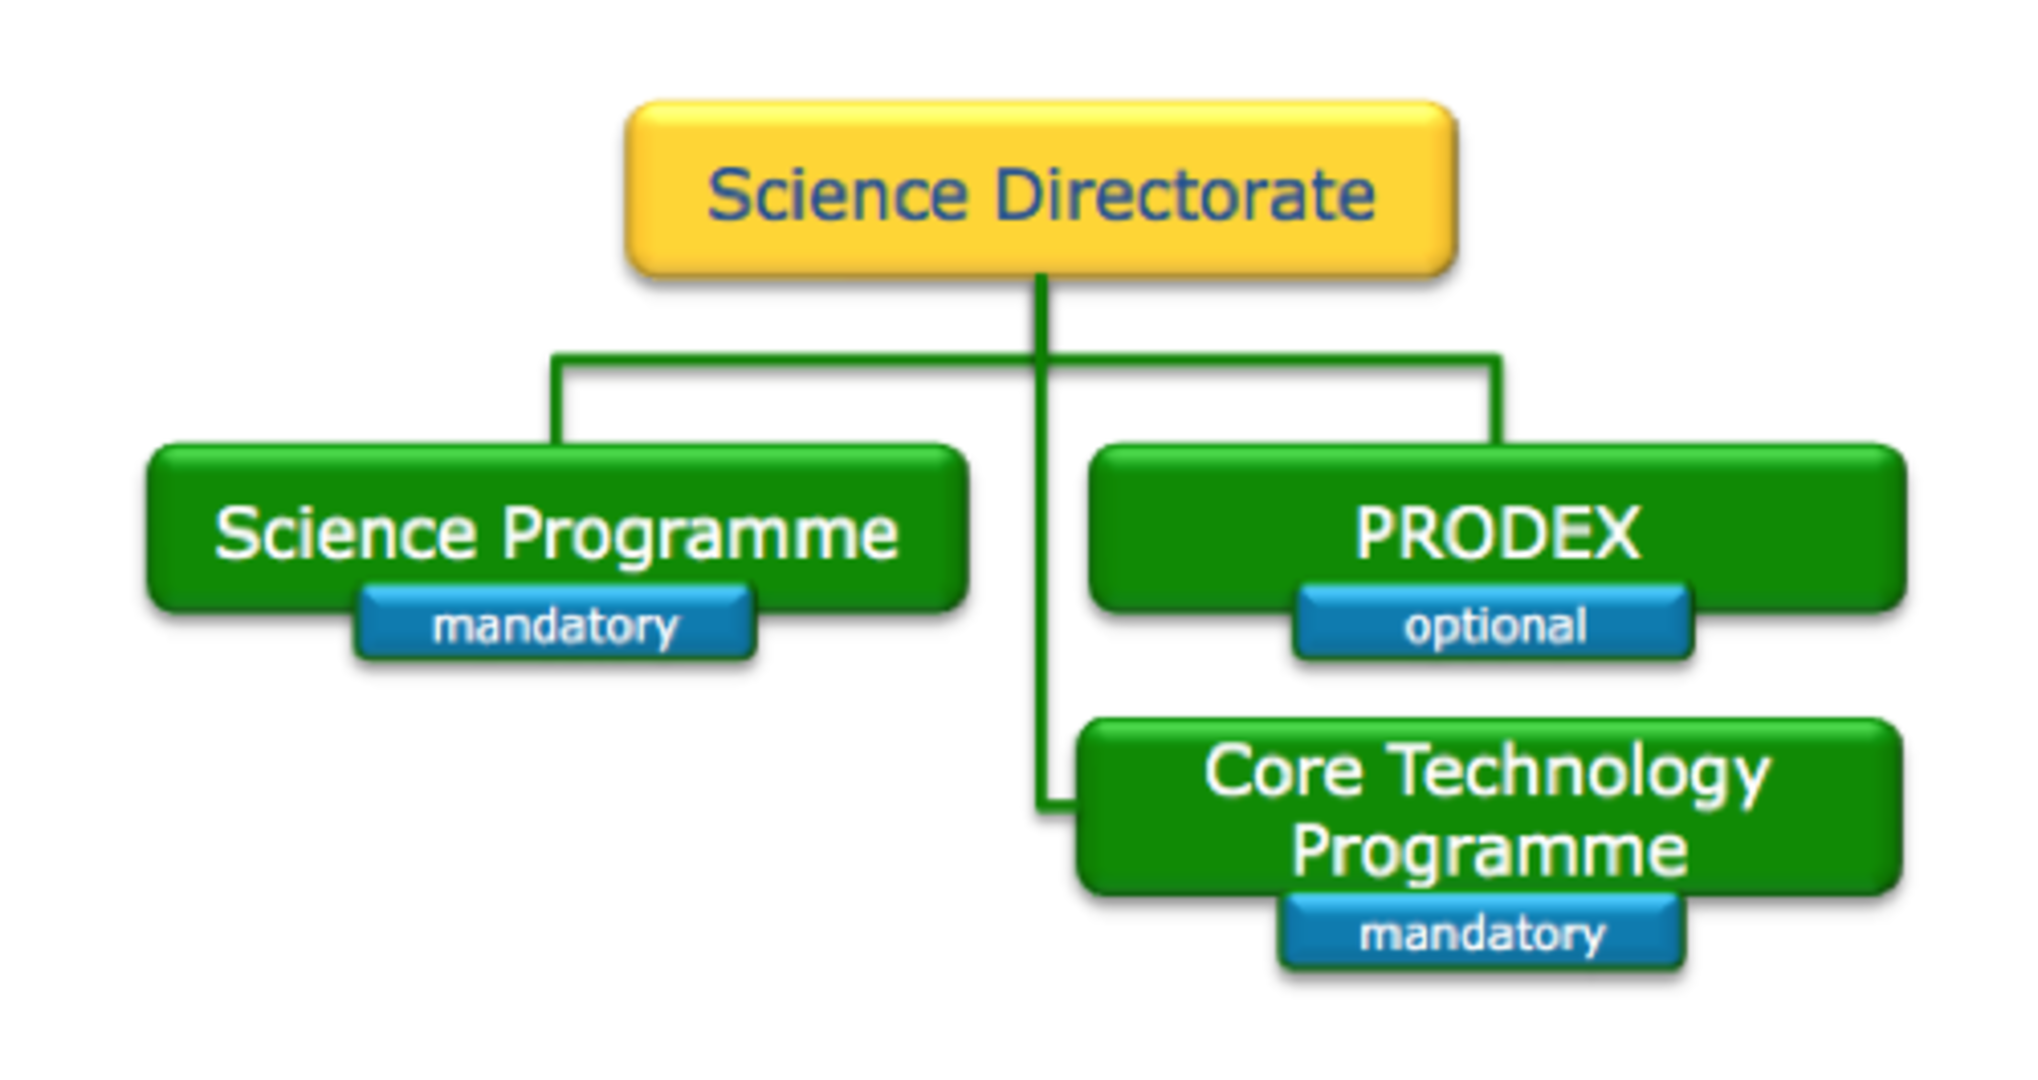 Directorate of Science